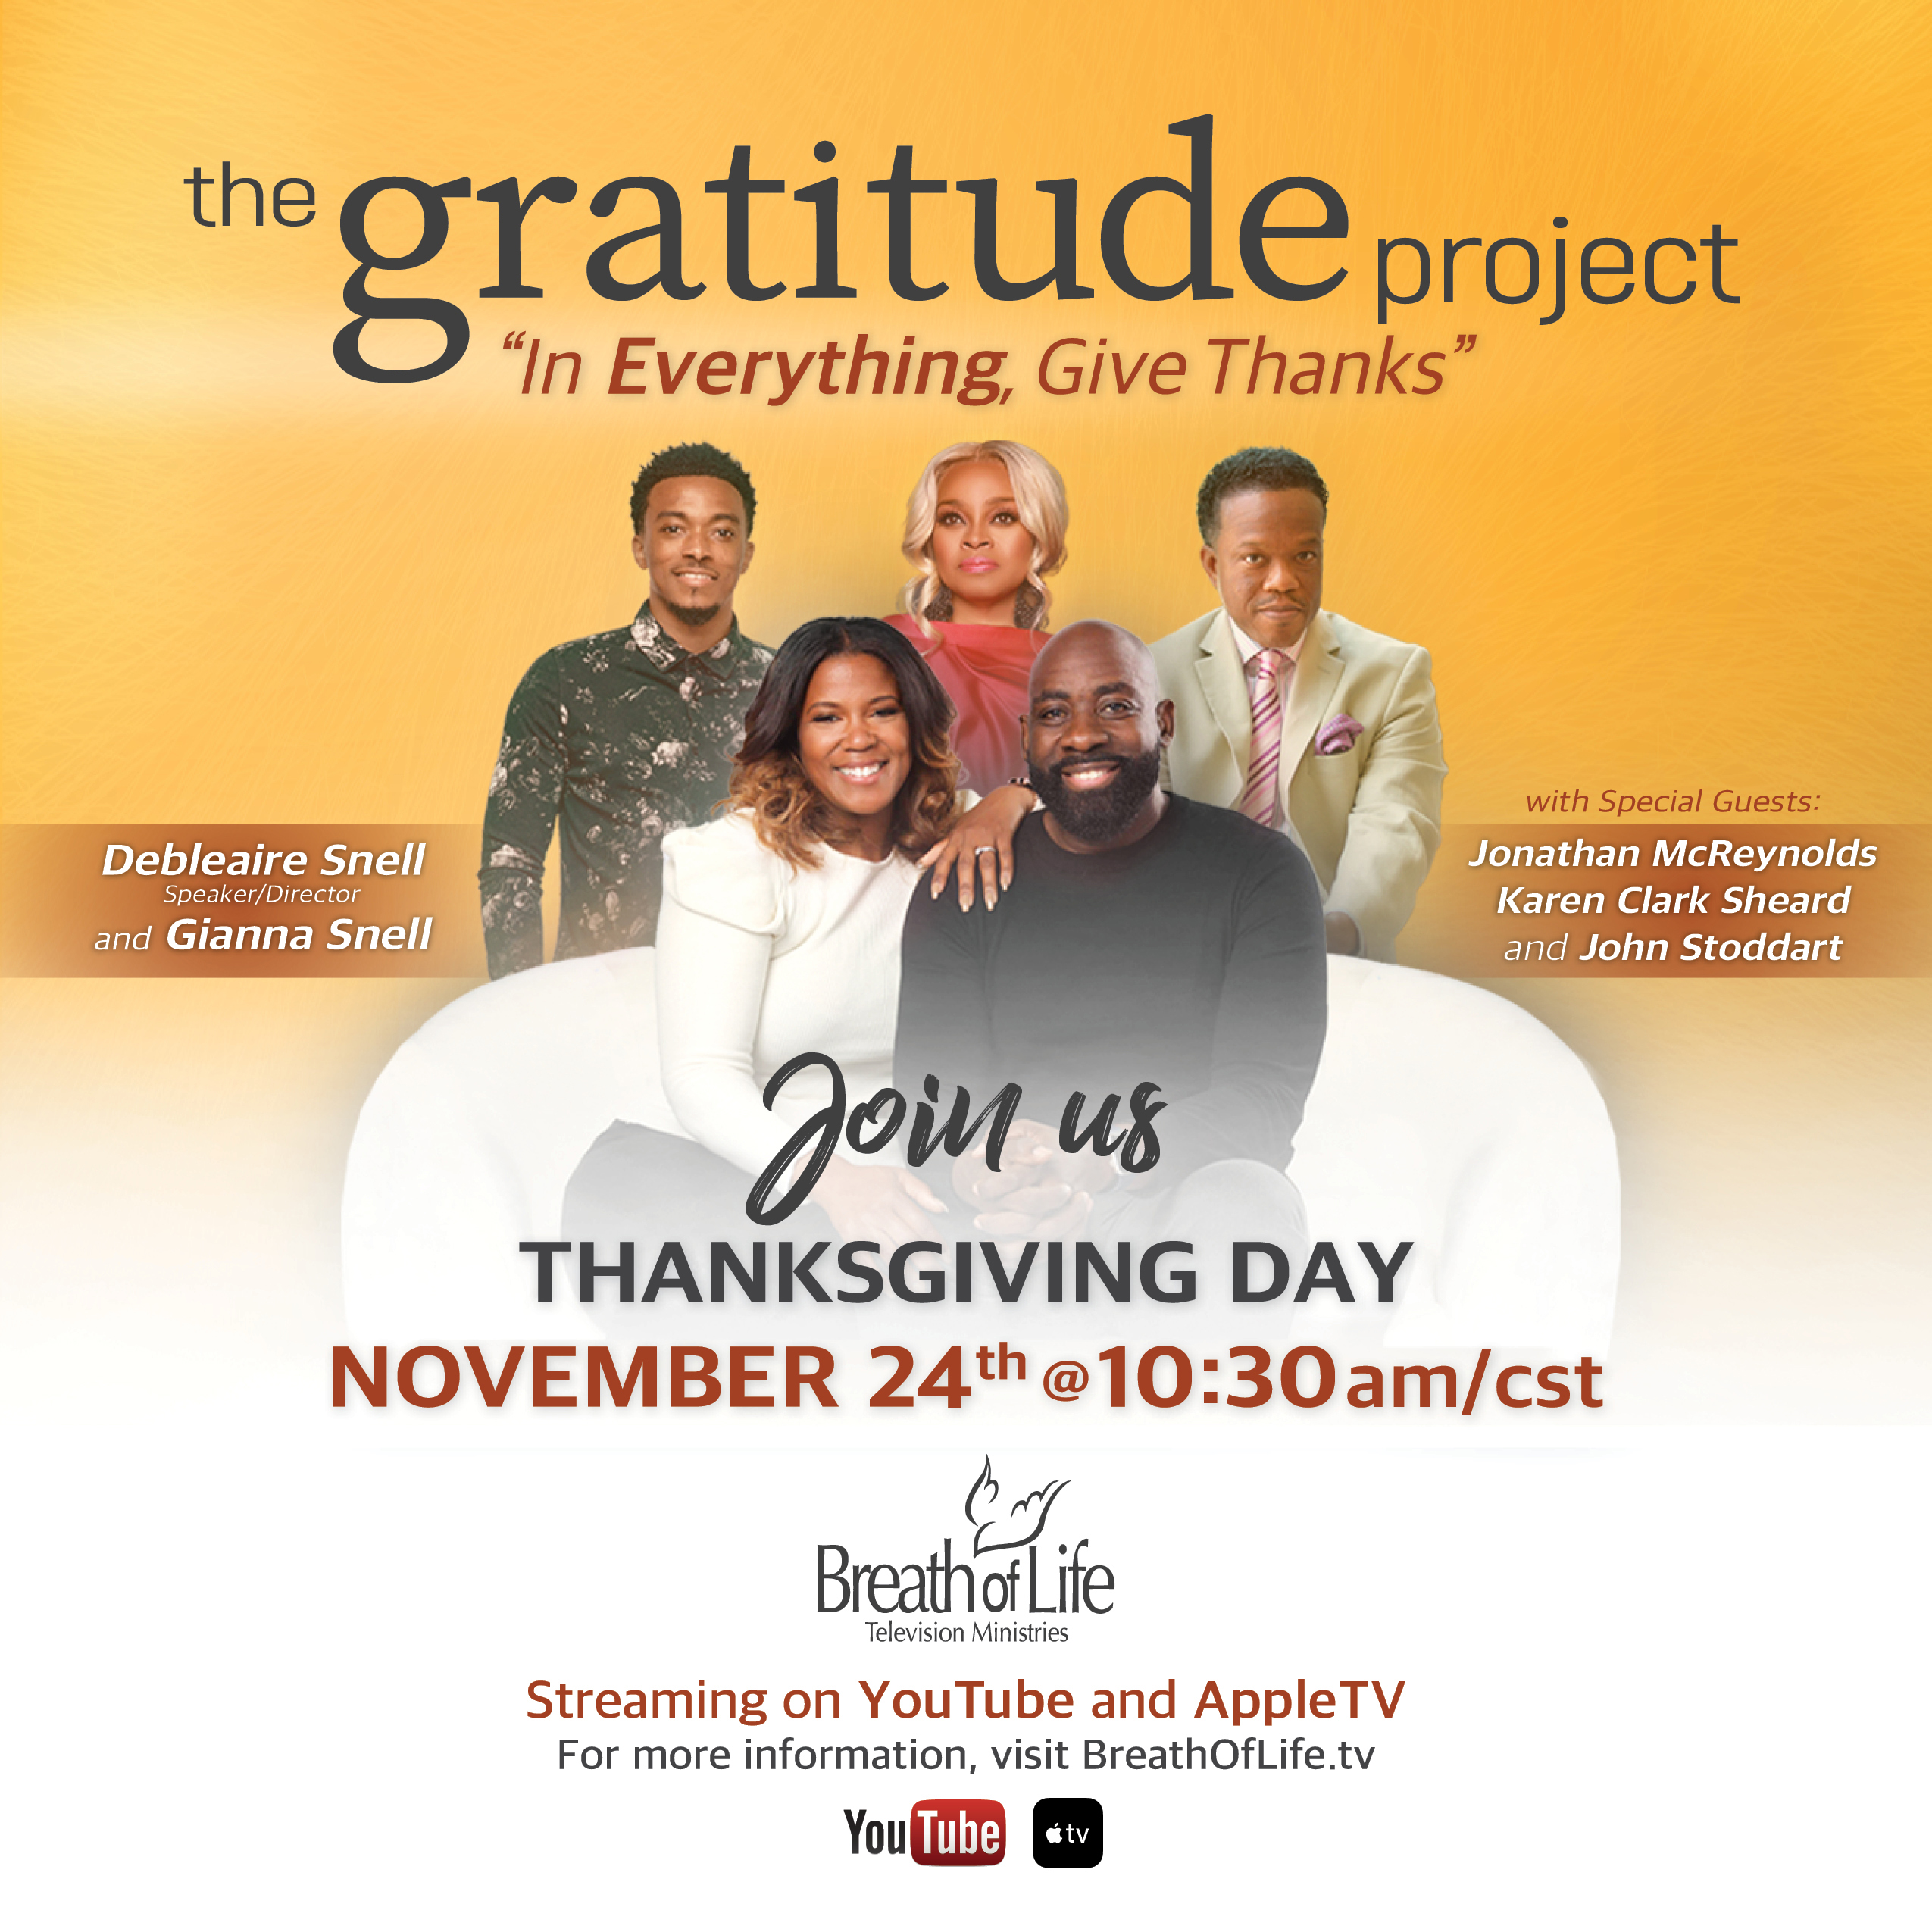 Breath of Life TV Ministries Thanksgiving special